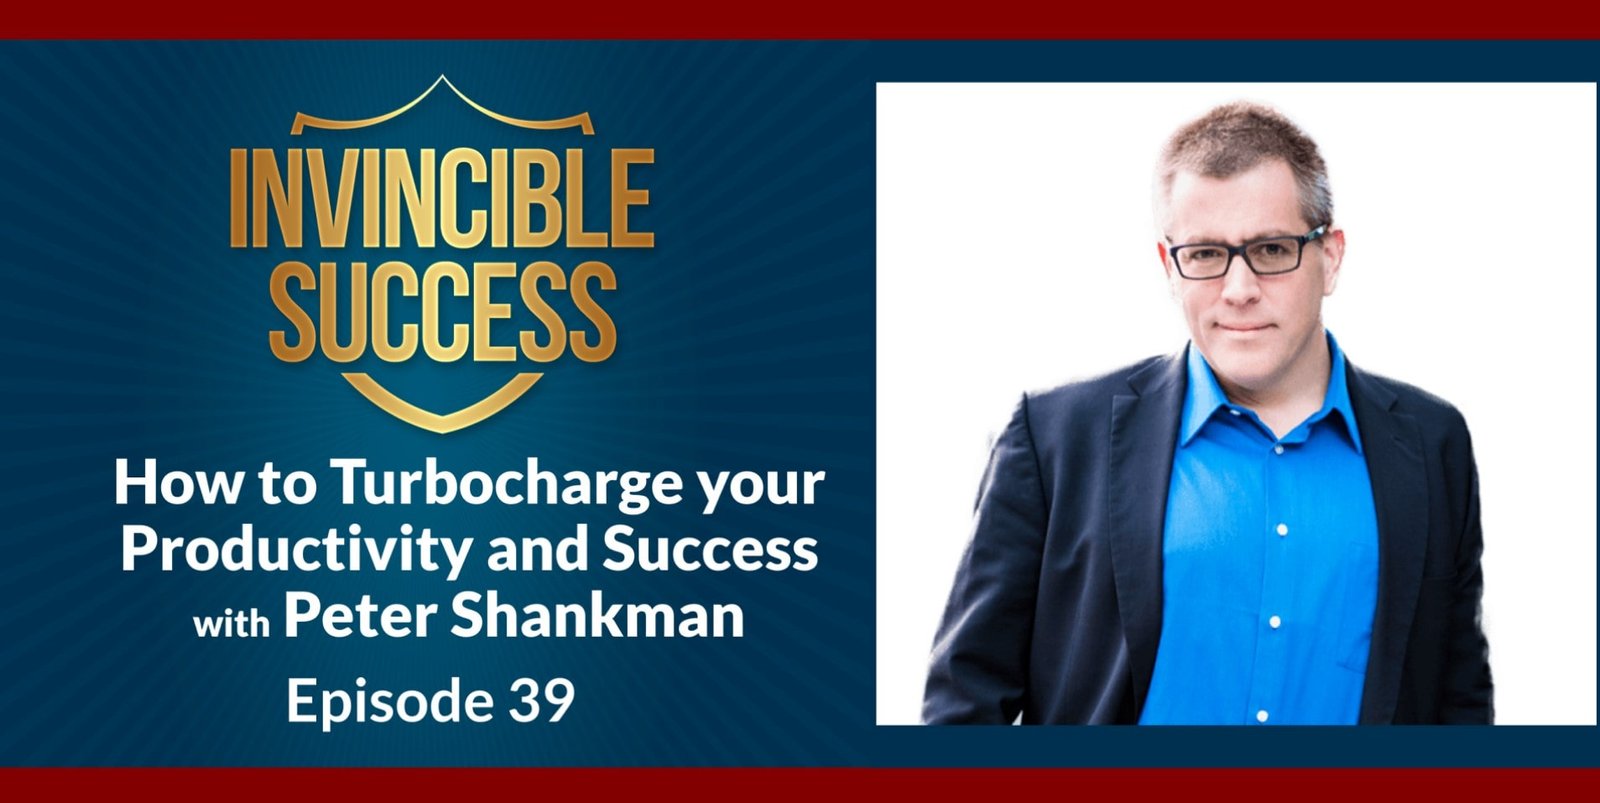 How to Turbocharge your Productivity and Success with Peter Shankman - Episode 39